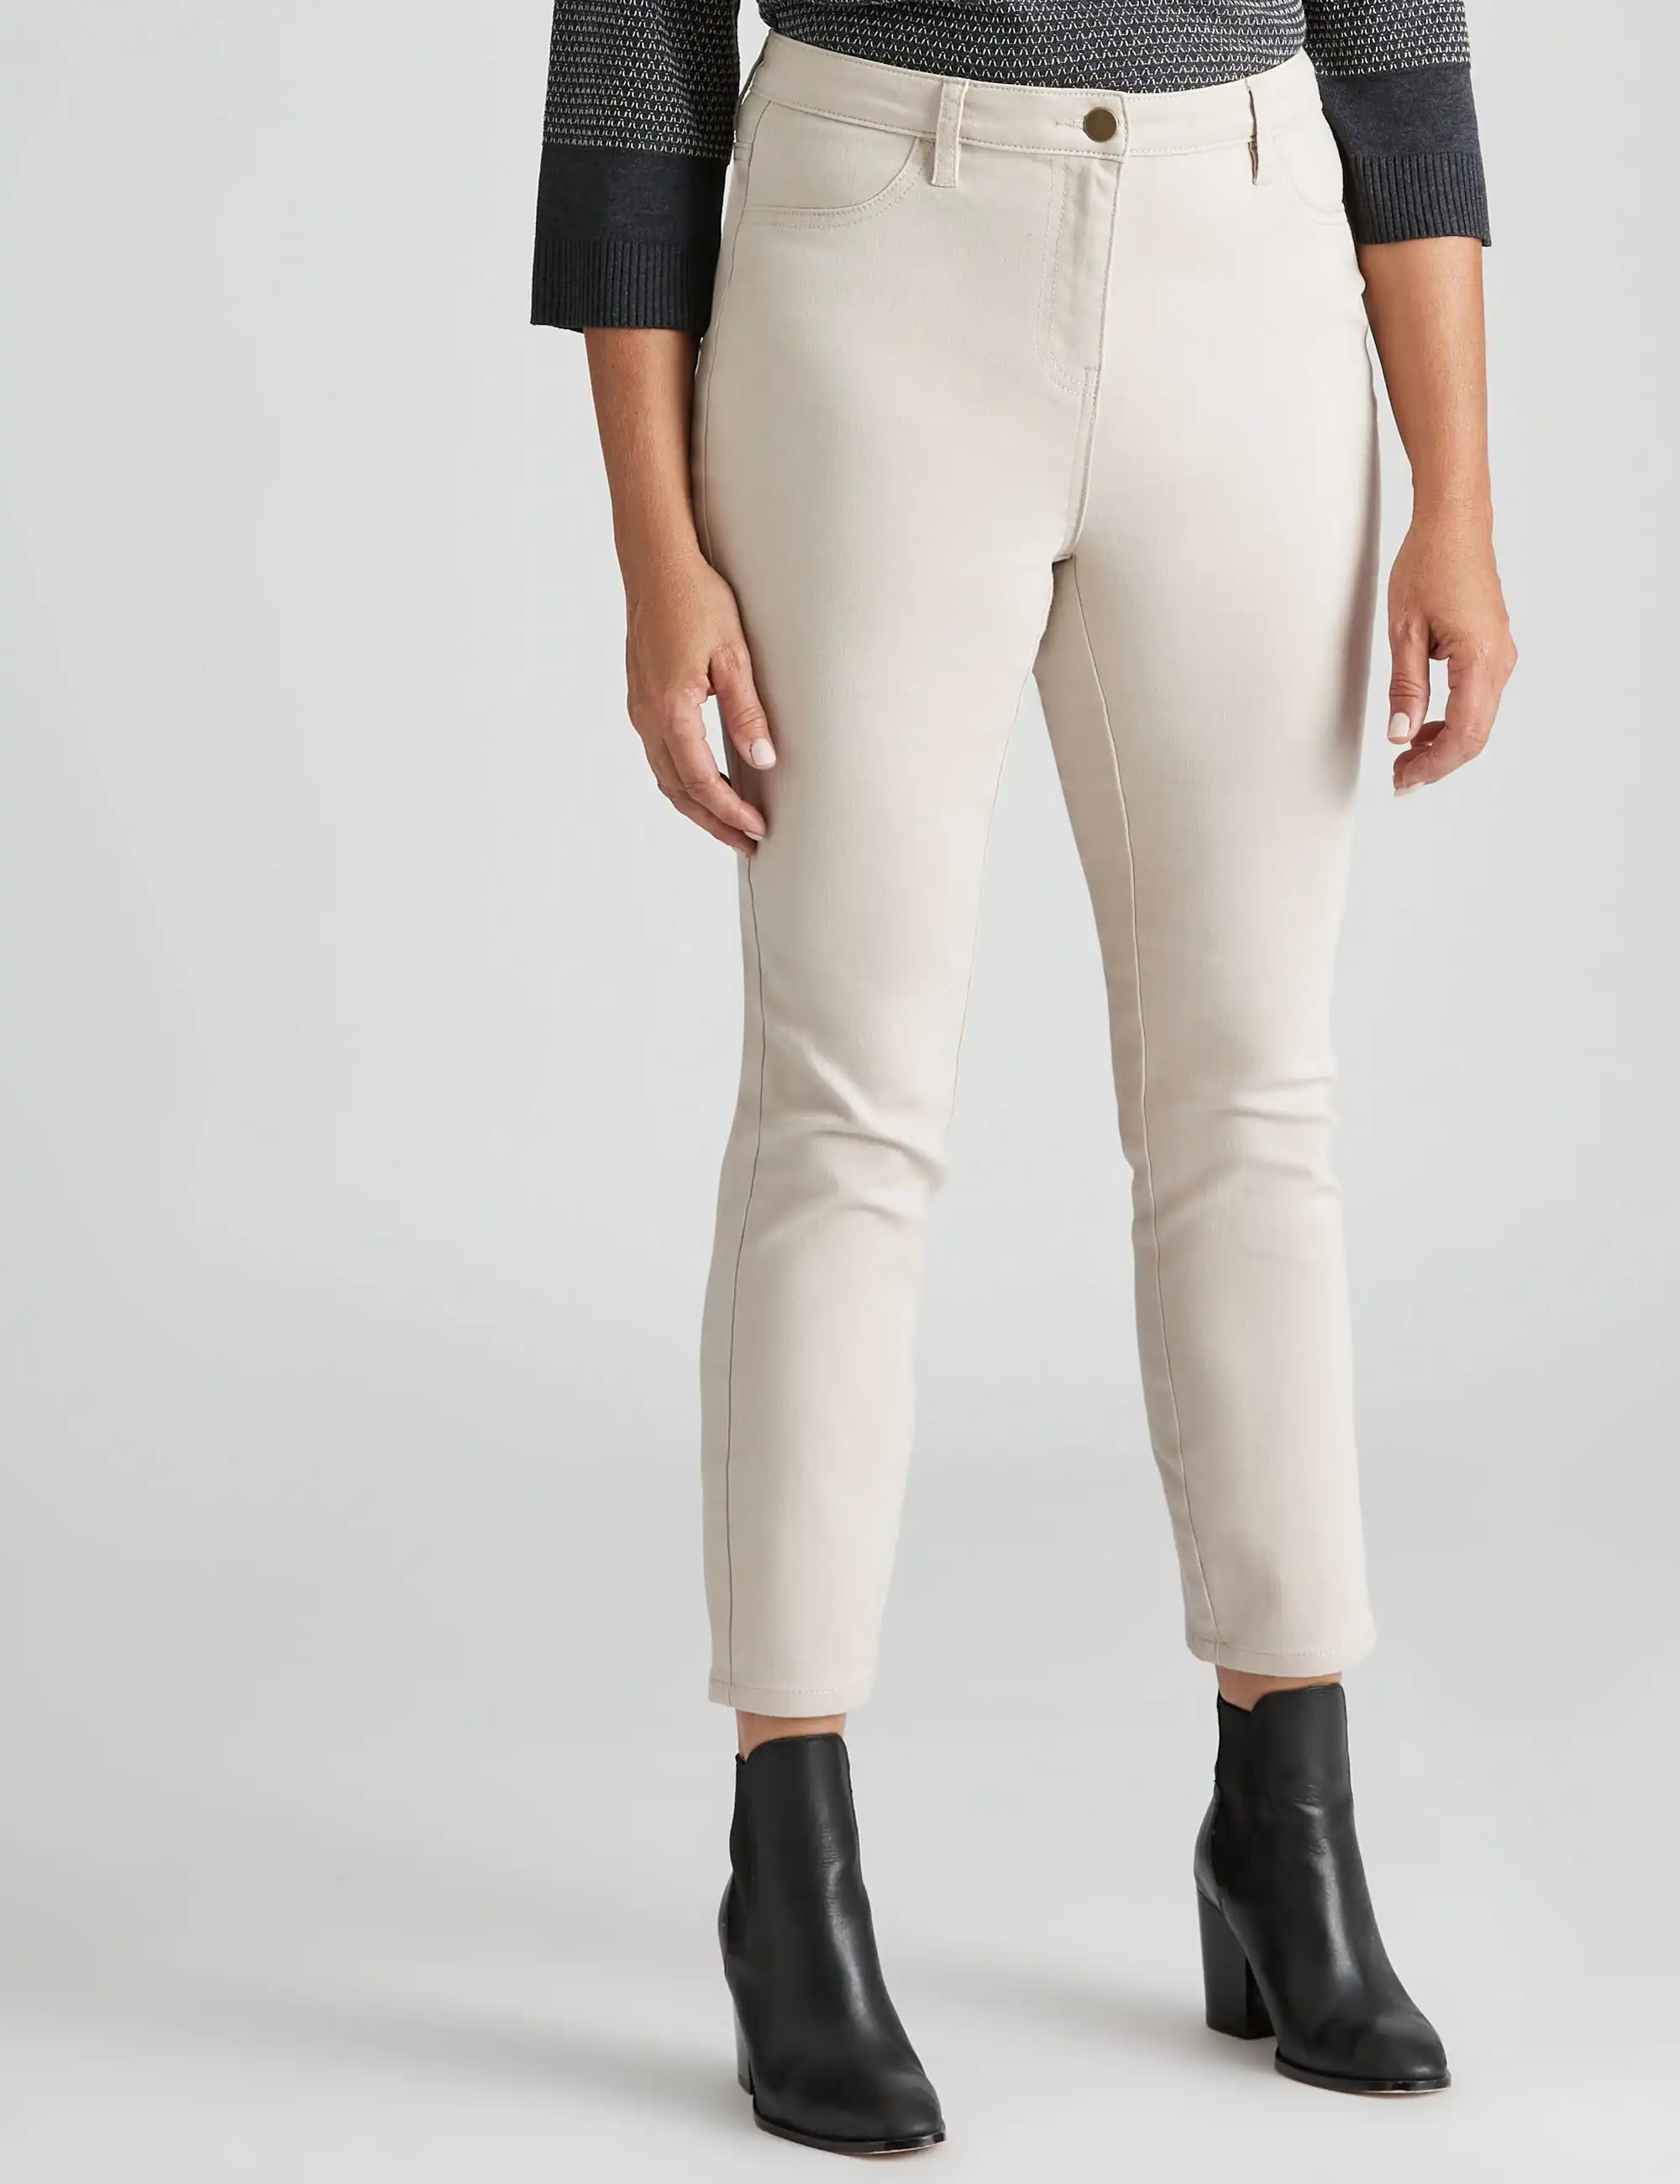 Millers Ale length High-Waist Jeggings